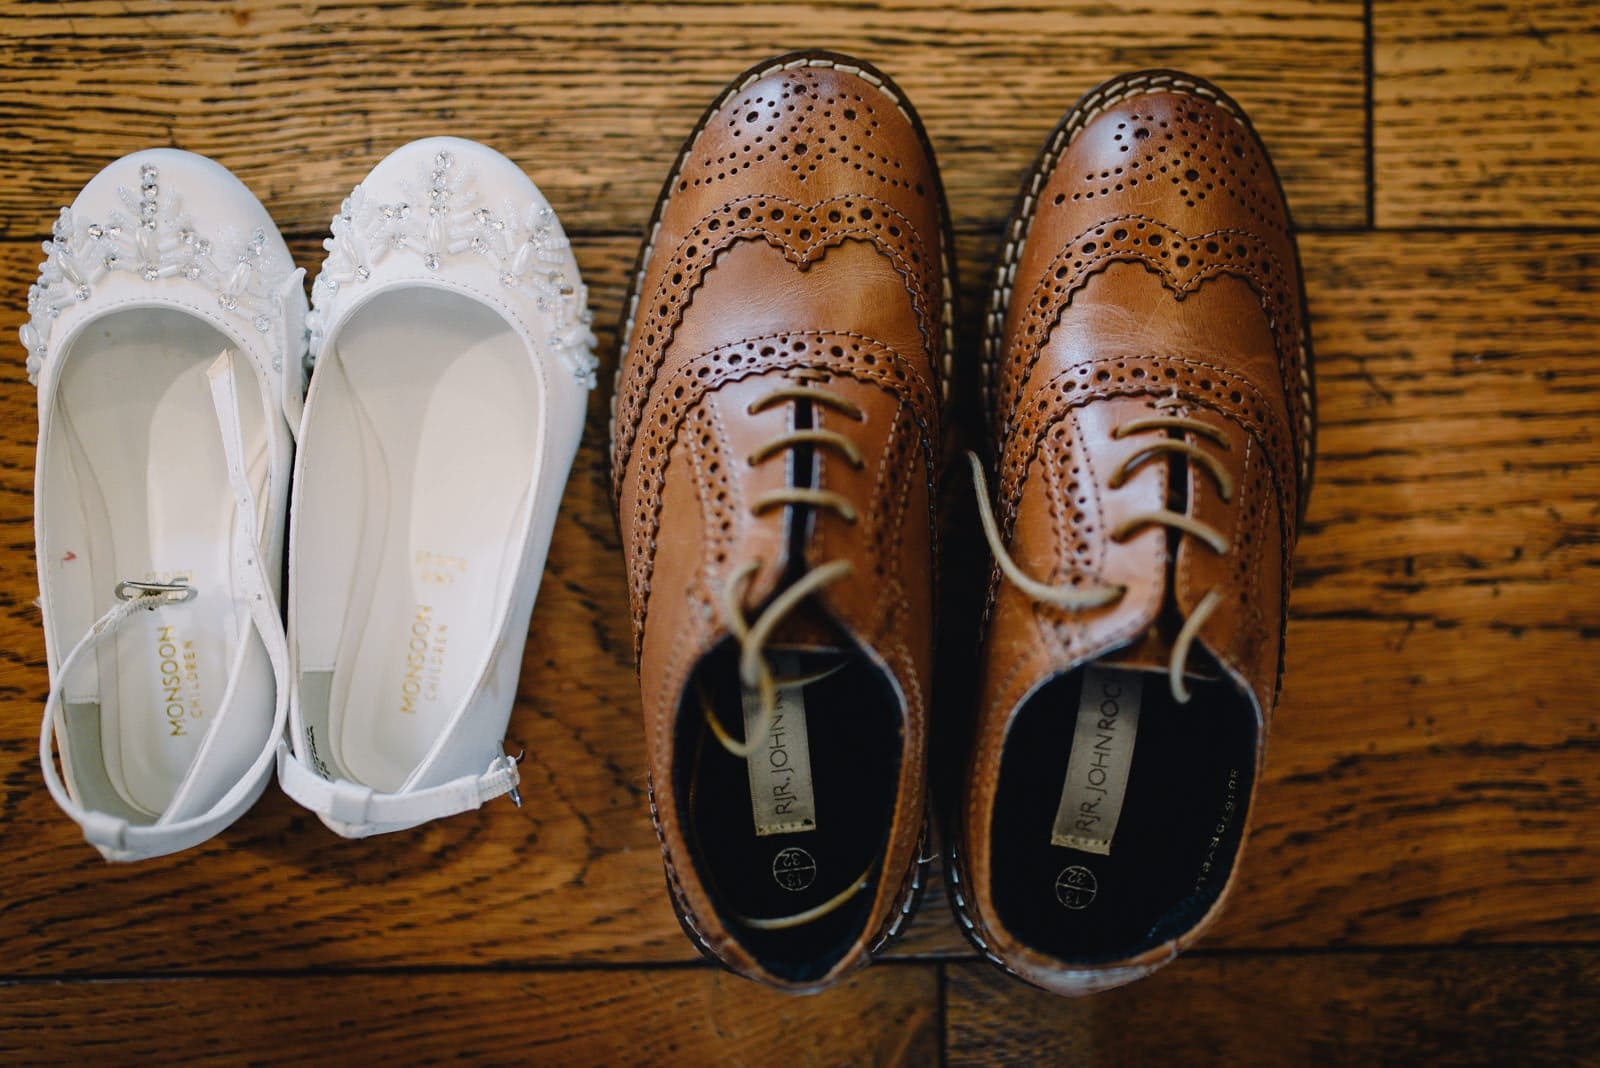 kids wedding shoes at the west mill venue in derby